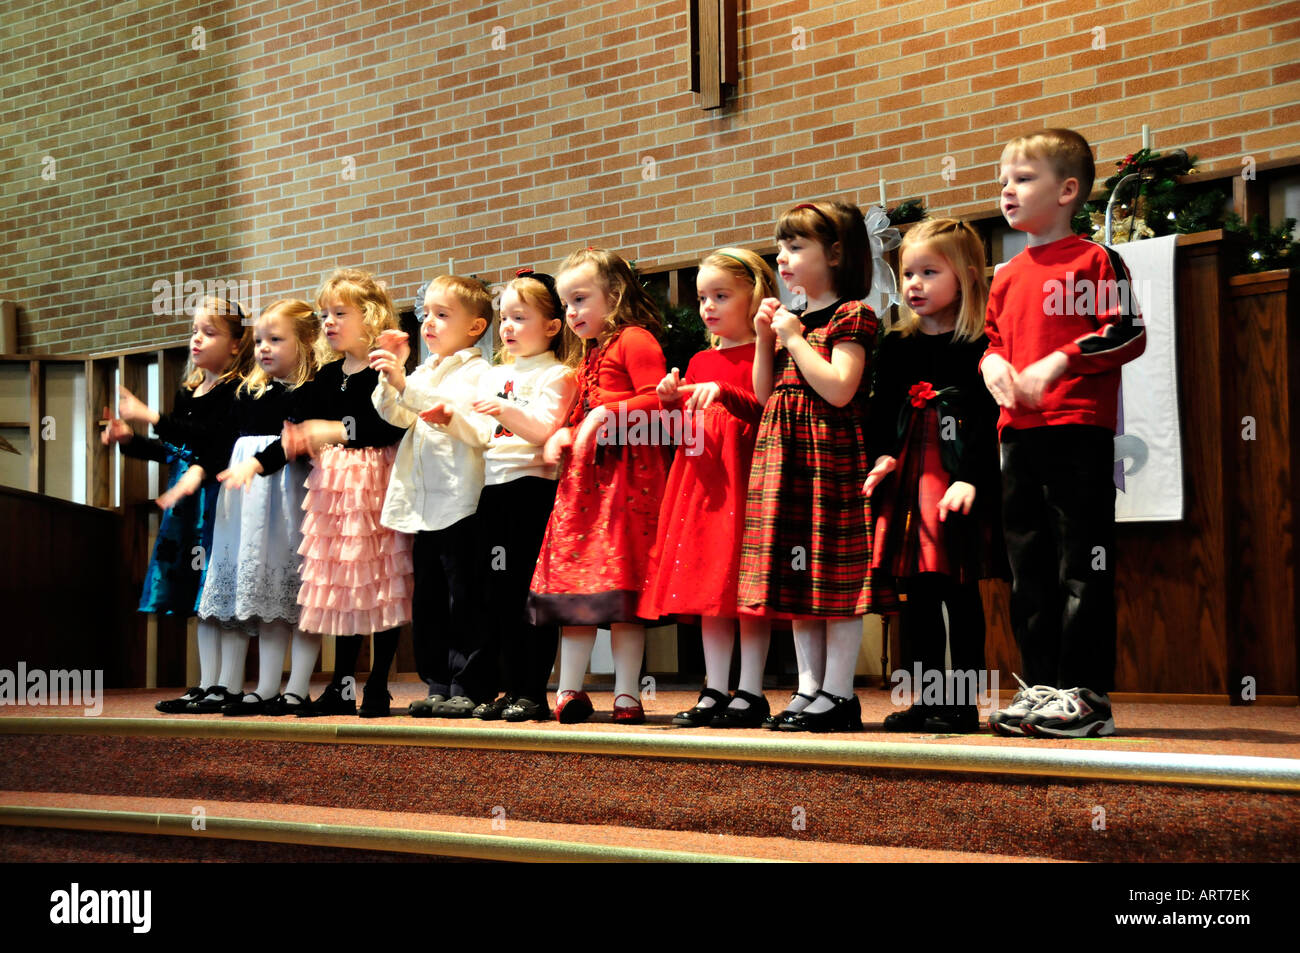 4 four year old pre school children hold recital performance for parents Stock Photo